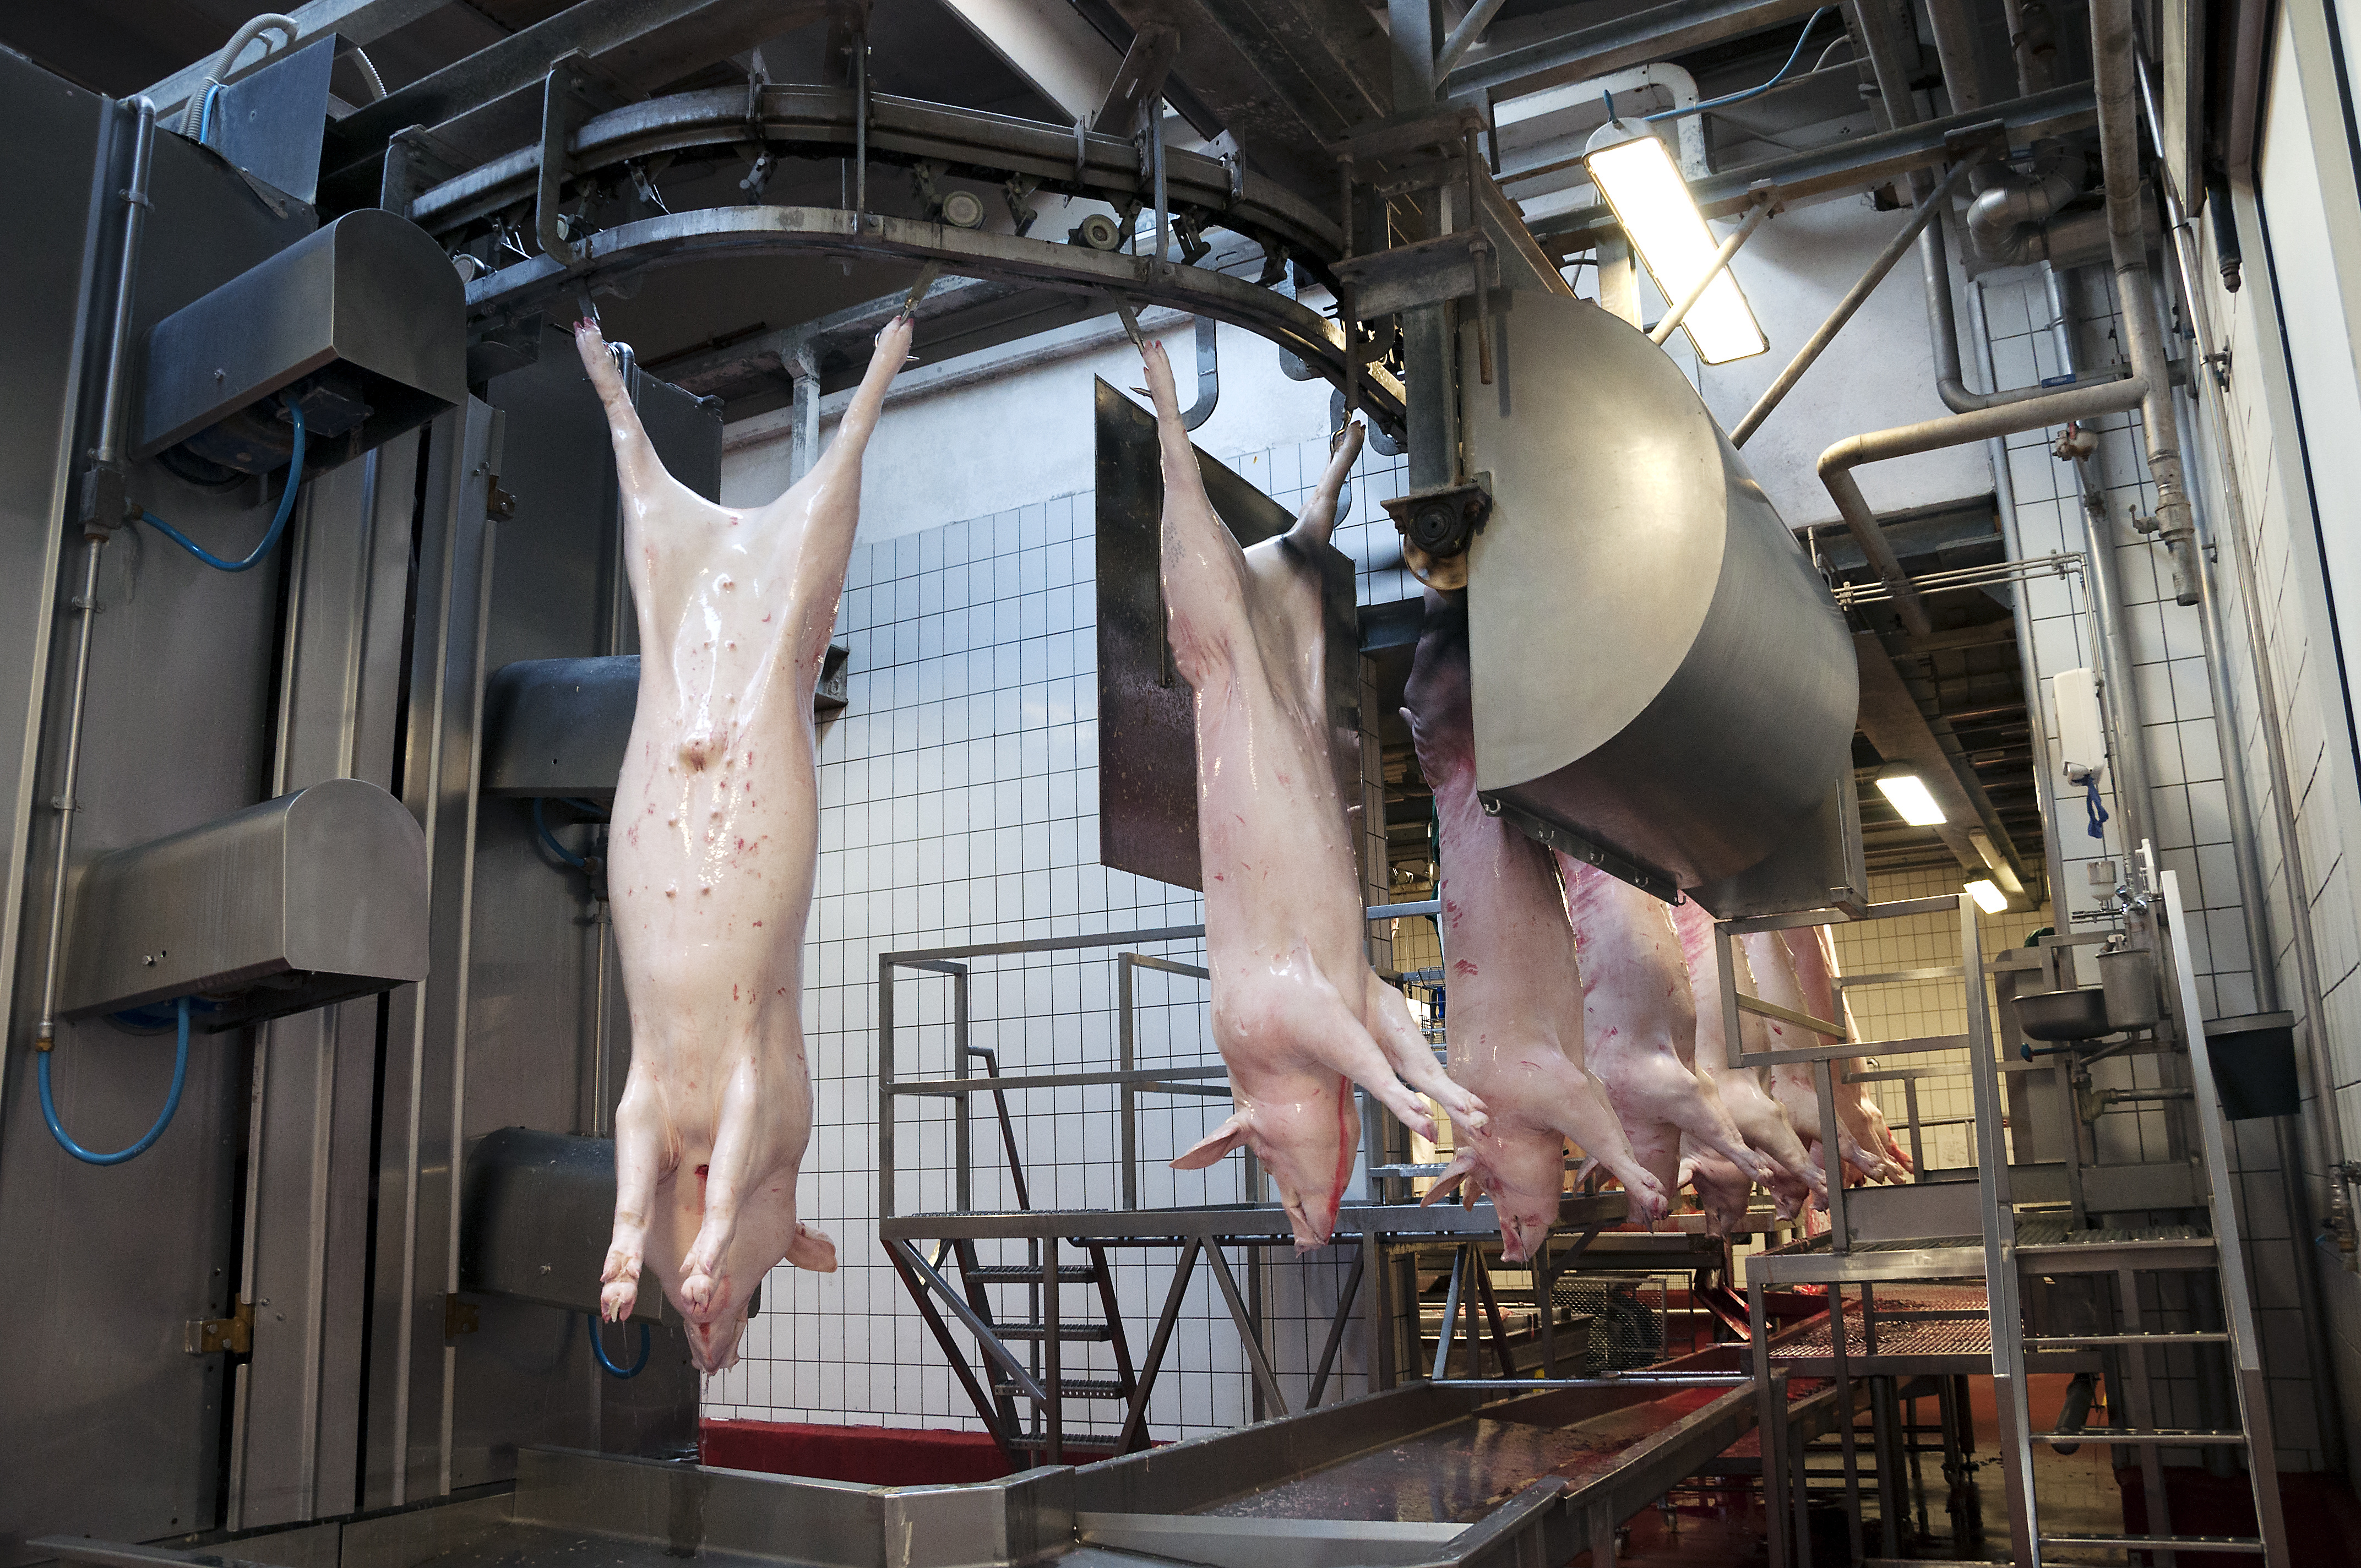 pigs hang in shackles post exsanguination in a meat processing plant